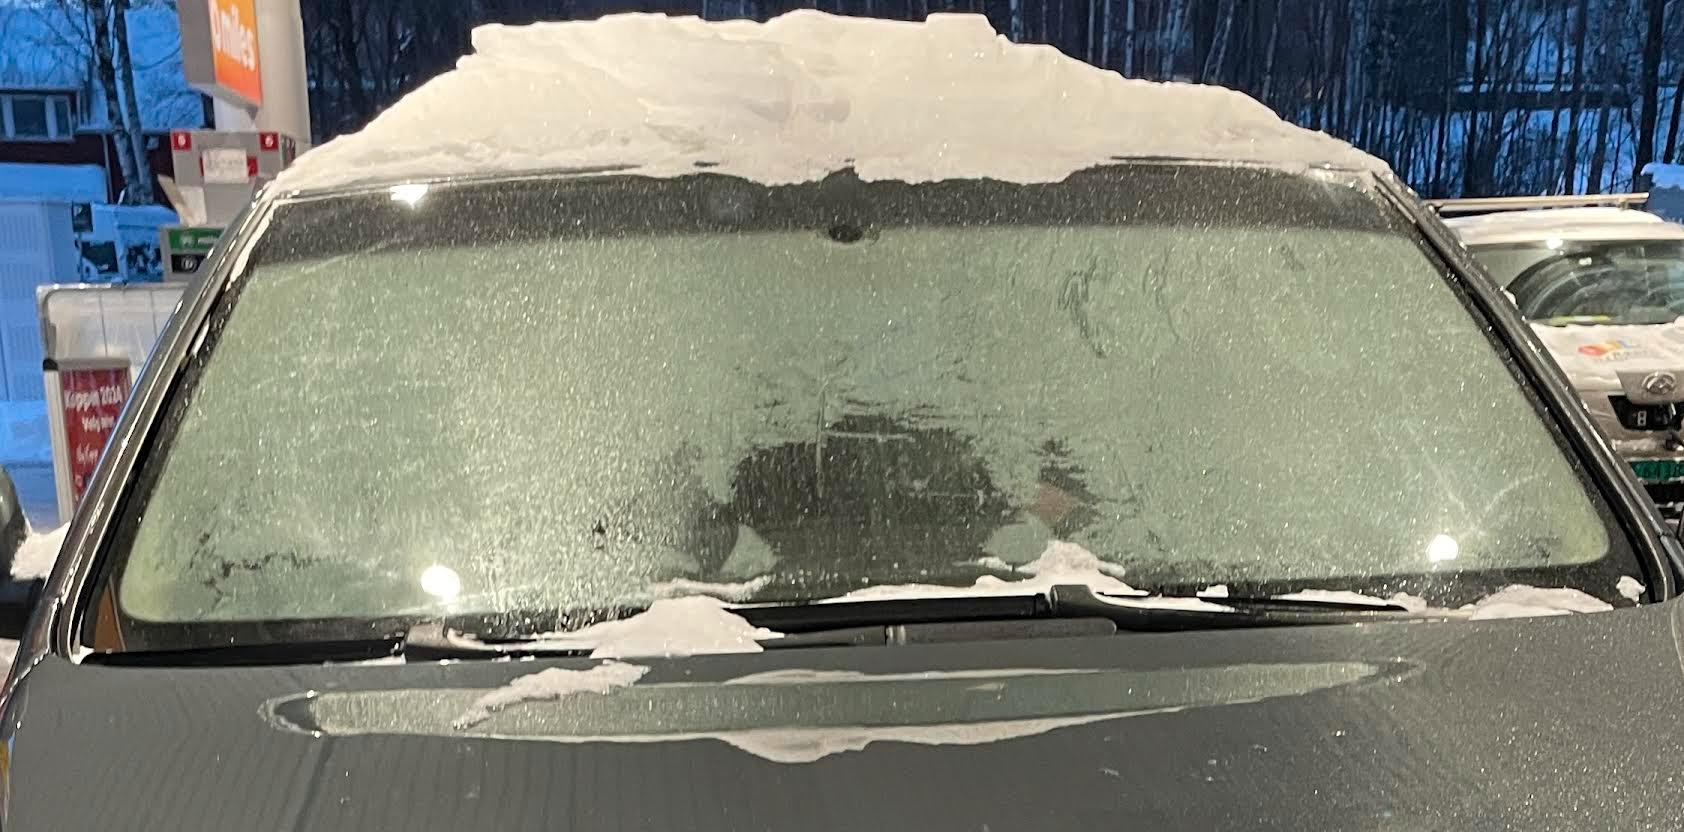 Oslo and Sandvika drivers lose licenses for icy windscreens